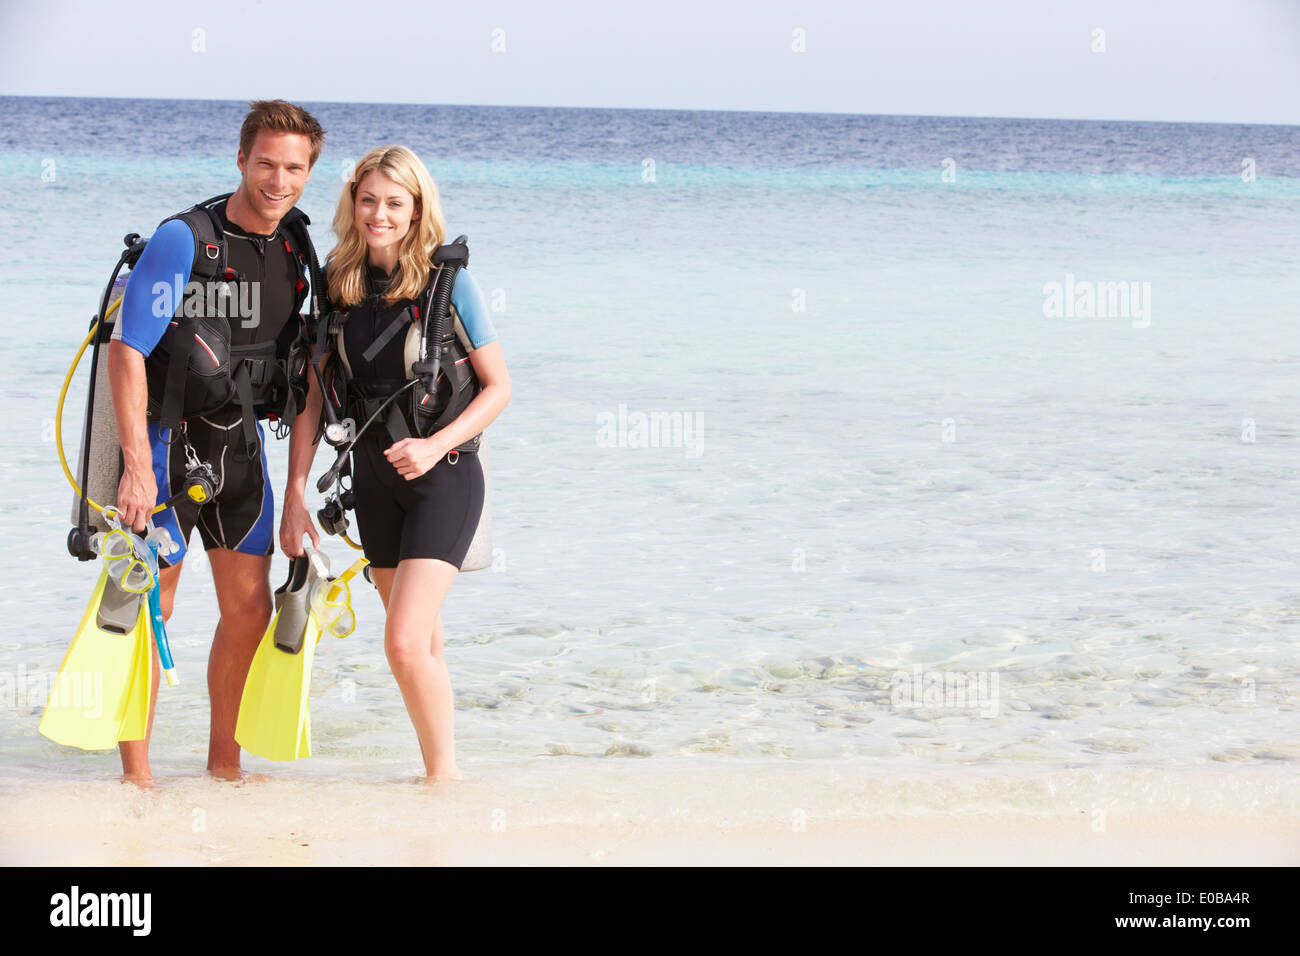 Couple With Scuba Diving Equipment Enjoying Beach Holiday Stock Photo